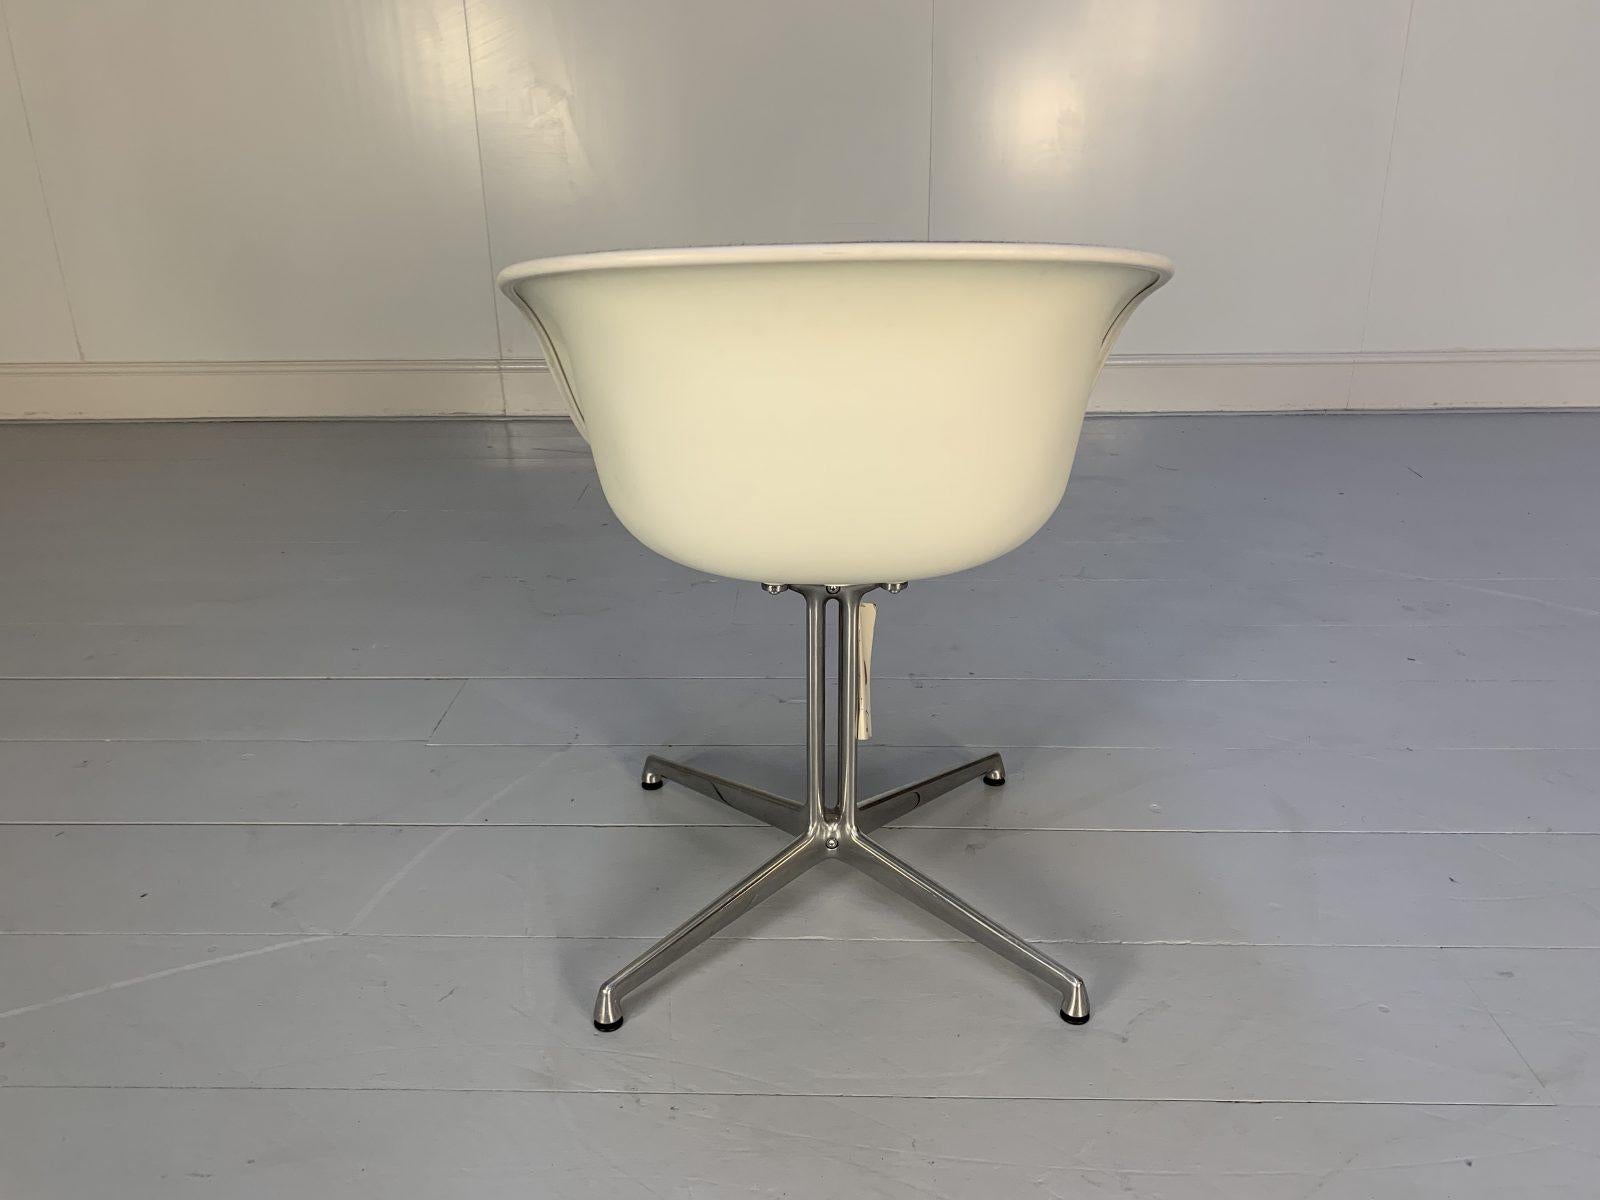 Vitra “La Fonda” Eames Chair & Marble Table in Black Hopsack For Sale 3